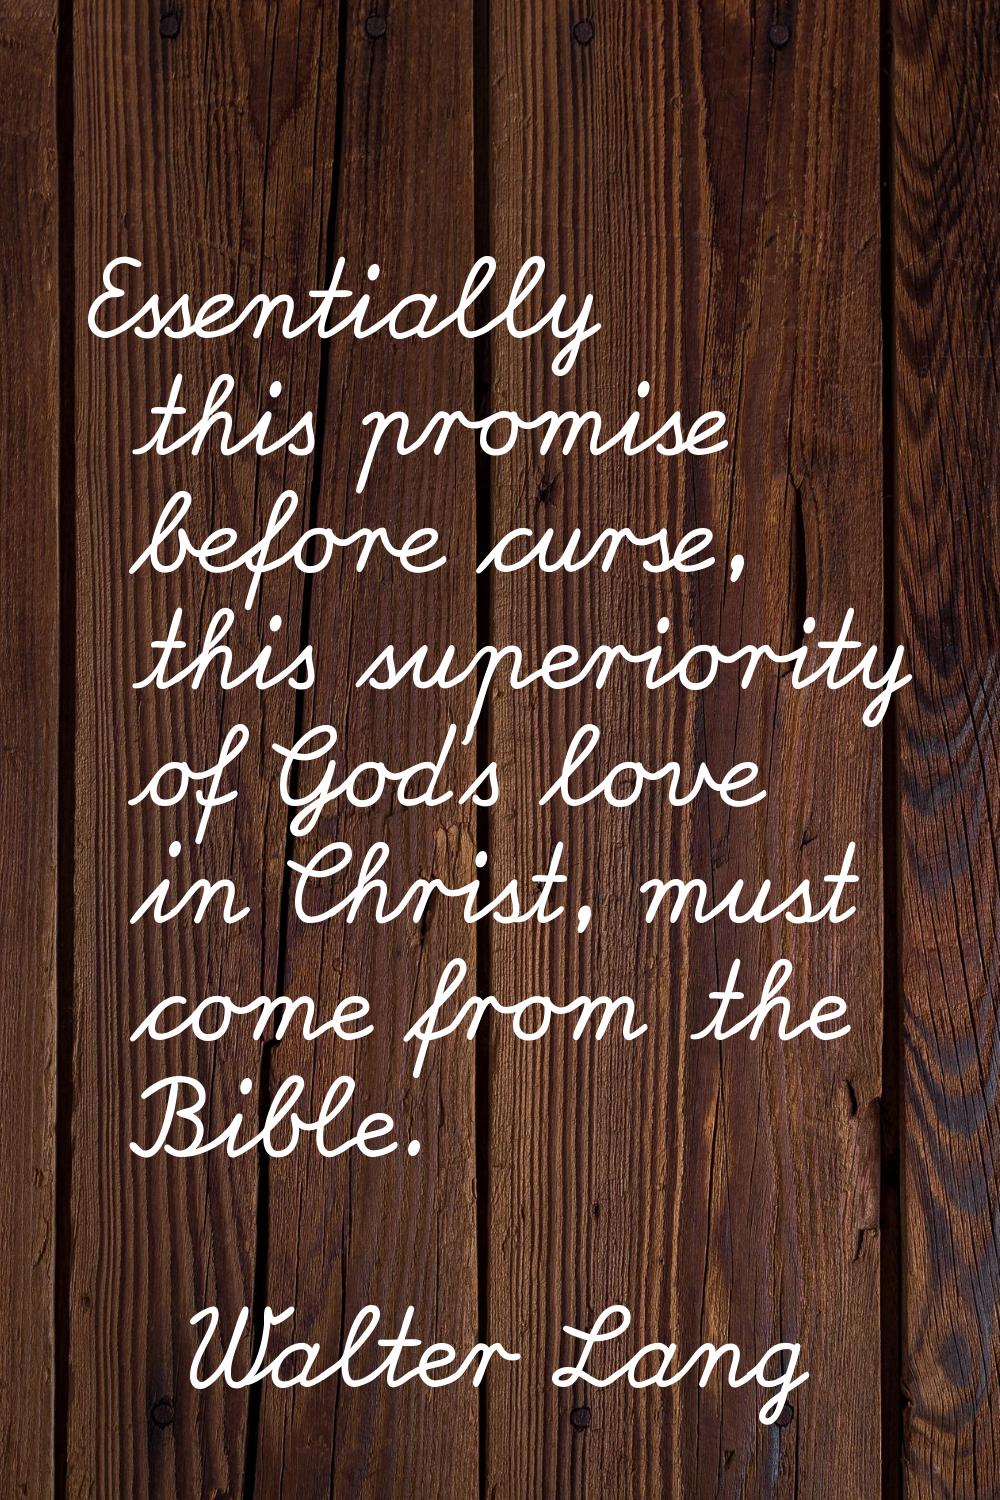 Essentially this promise before curse, this superiority of God's love in Christ, must come from the